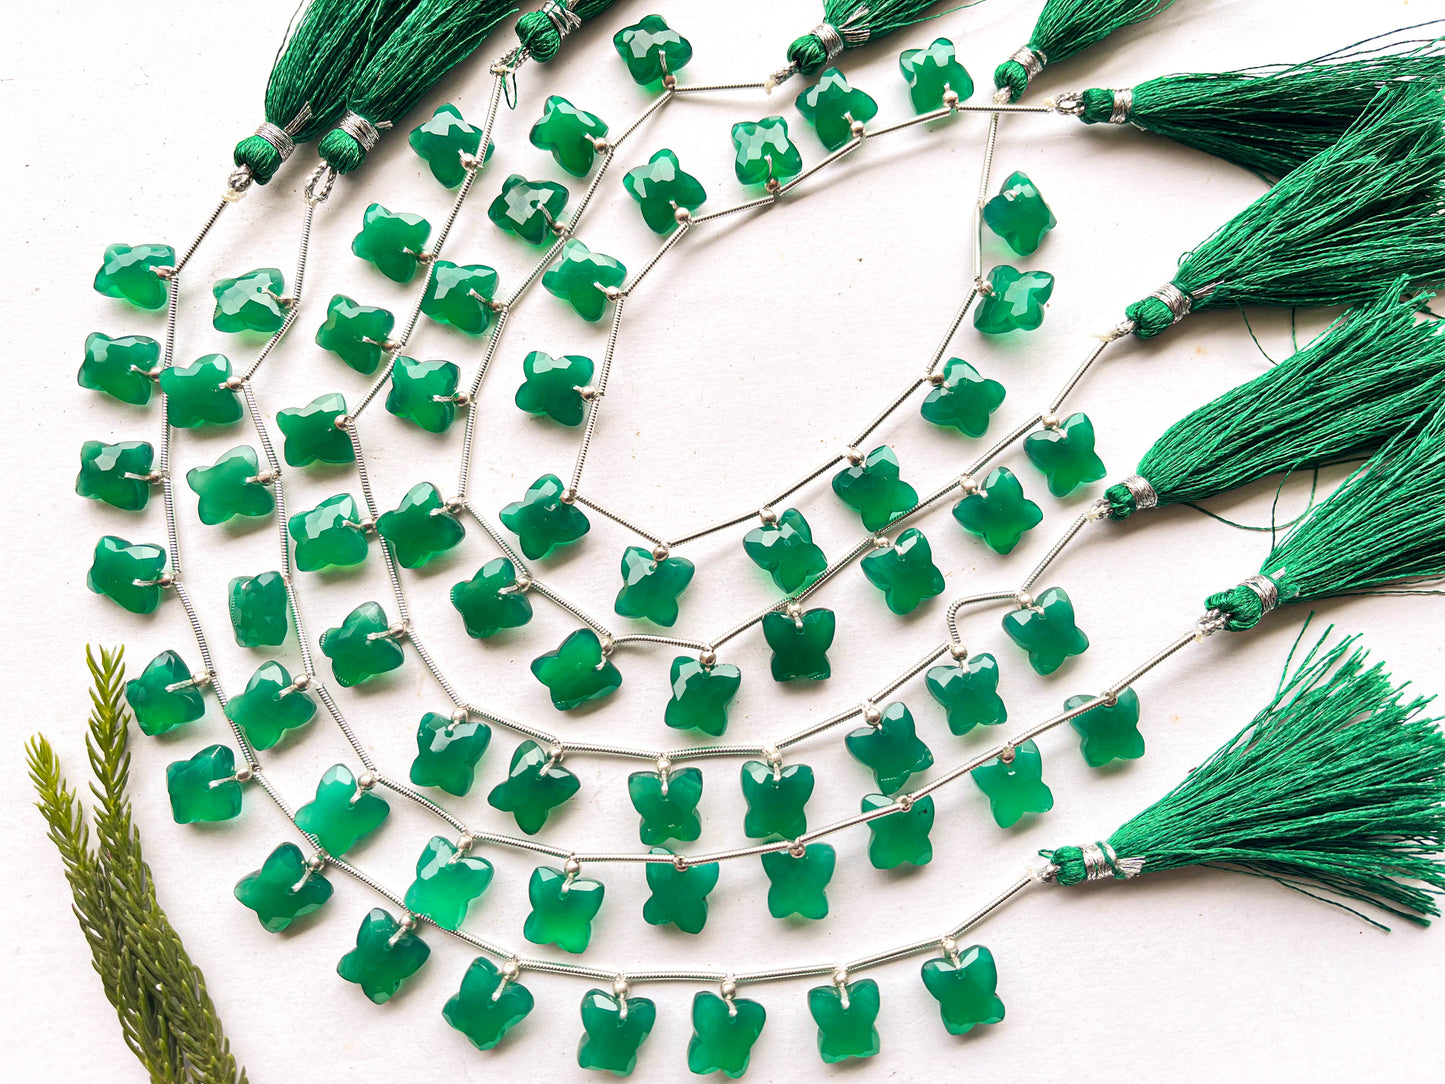 Green Onyx Butterfly Shape Faceted Beads, 13 Pieces Beadsforyourjewelry